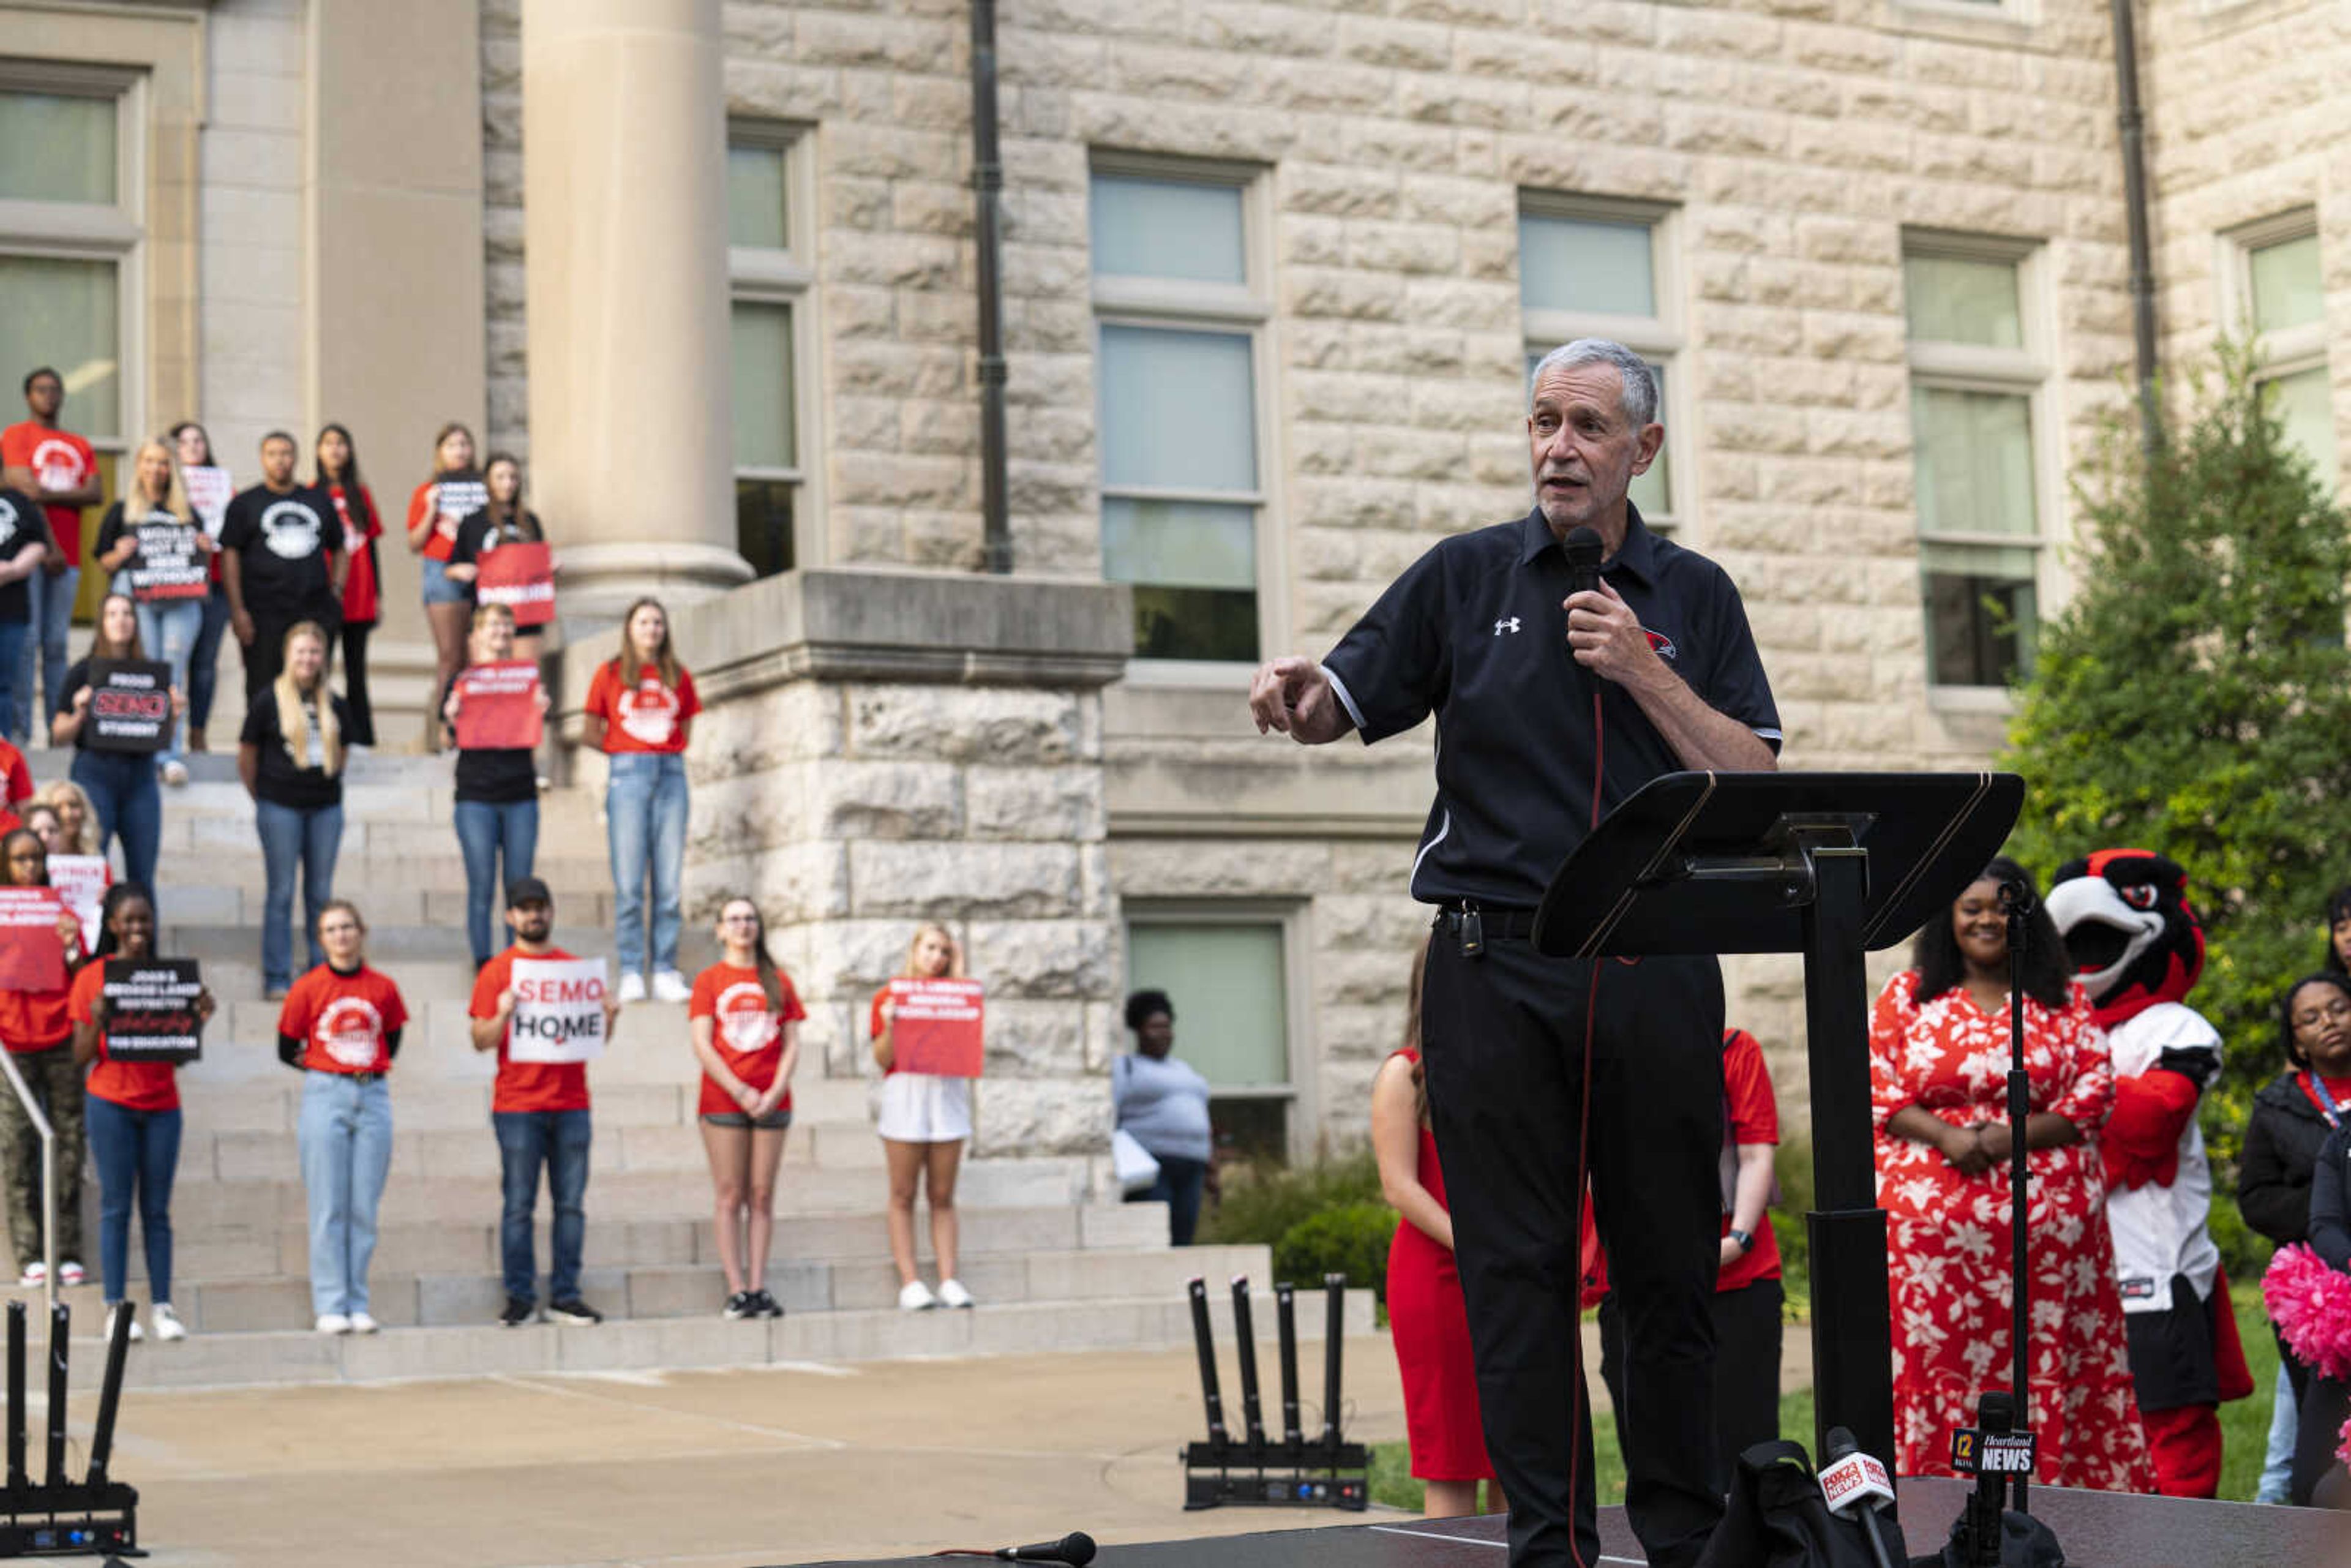 SEMO university president Carlos Vargas announces a new comprehensive fundraising campaign for university advancements on Oct. 13 in front of Academic Hall at the Homecoming Kickoff Block Party. The campaign is the largest fundraising effort in the history of the university.